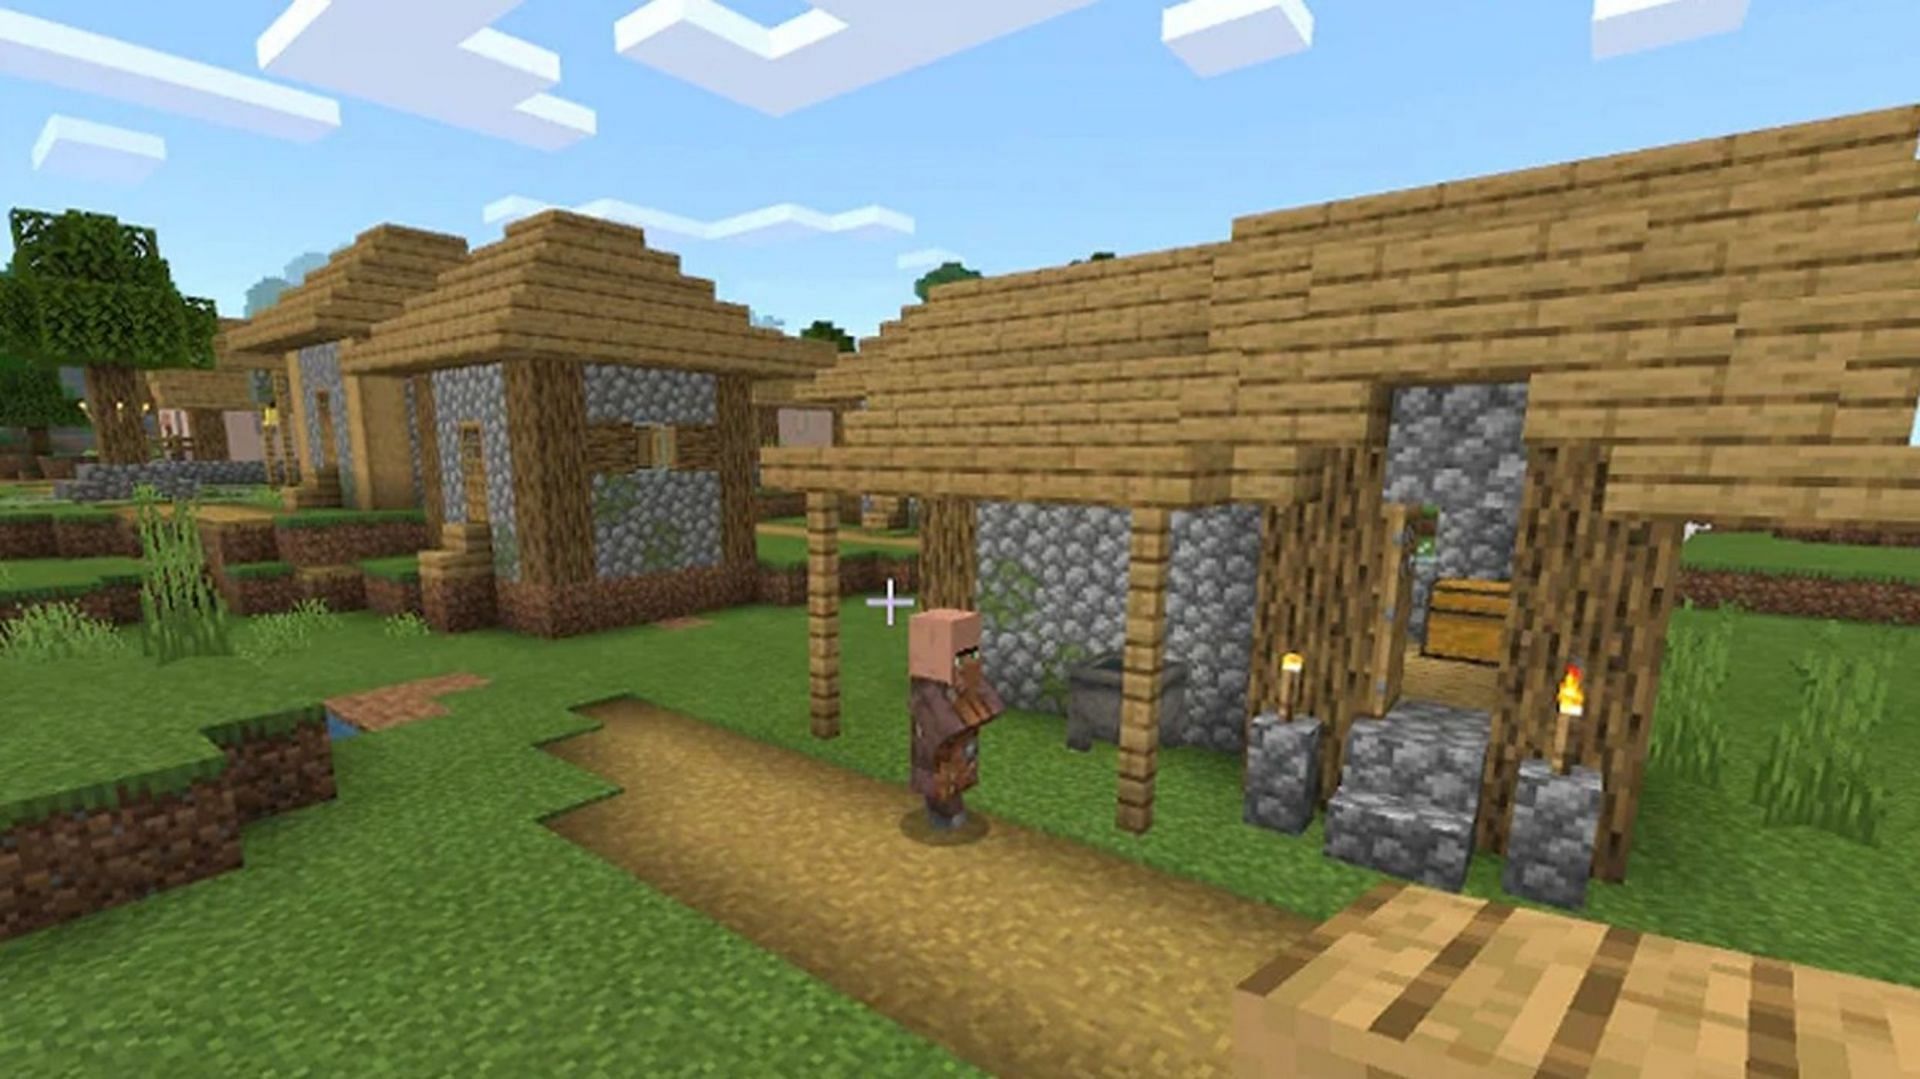 Villages come in many different varieties in the Overworld (Image via Minecraft.net)